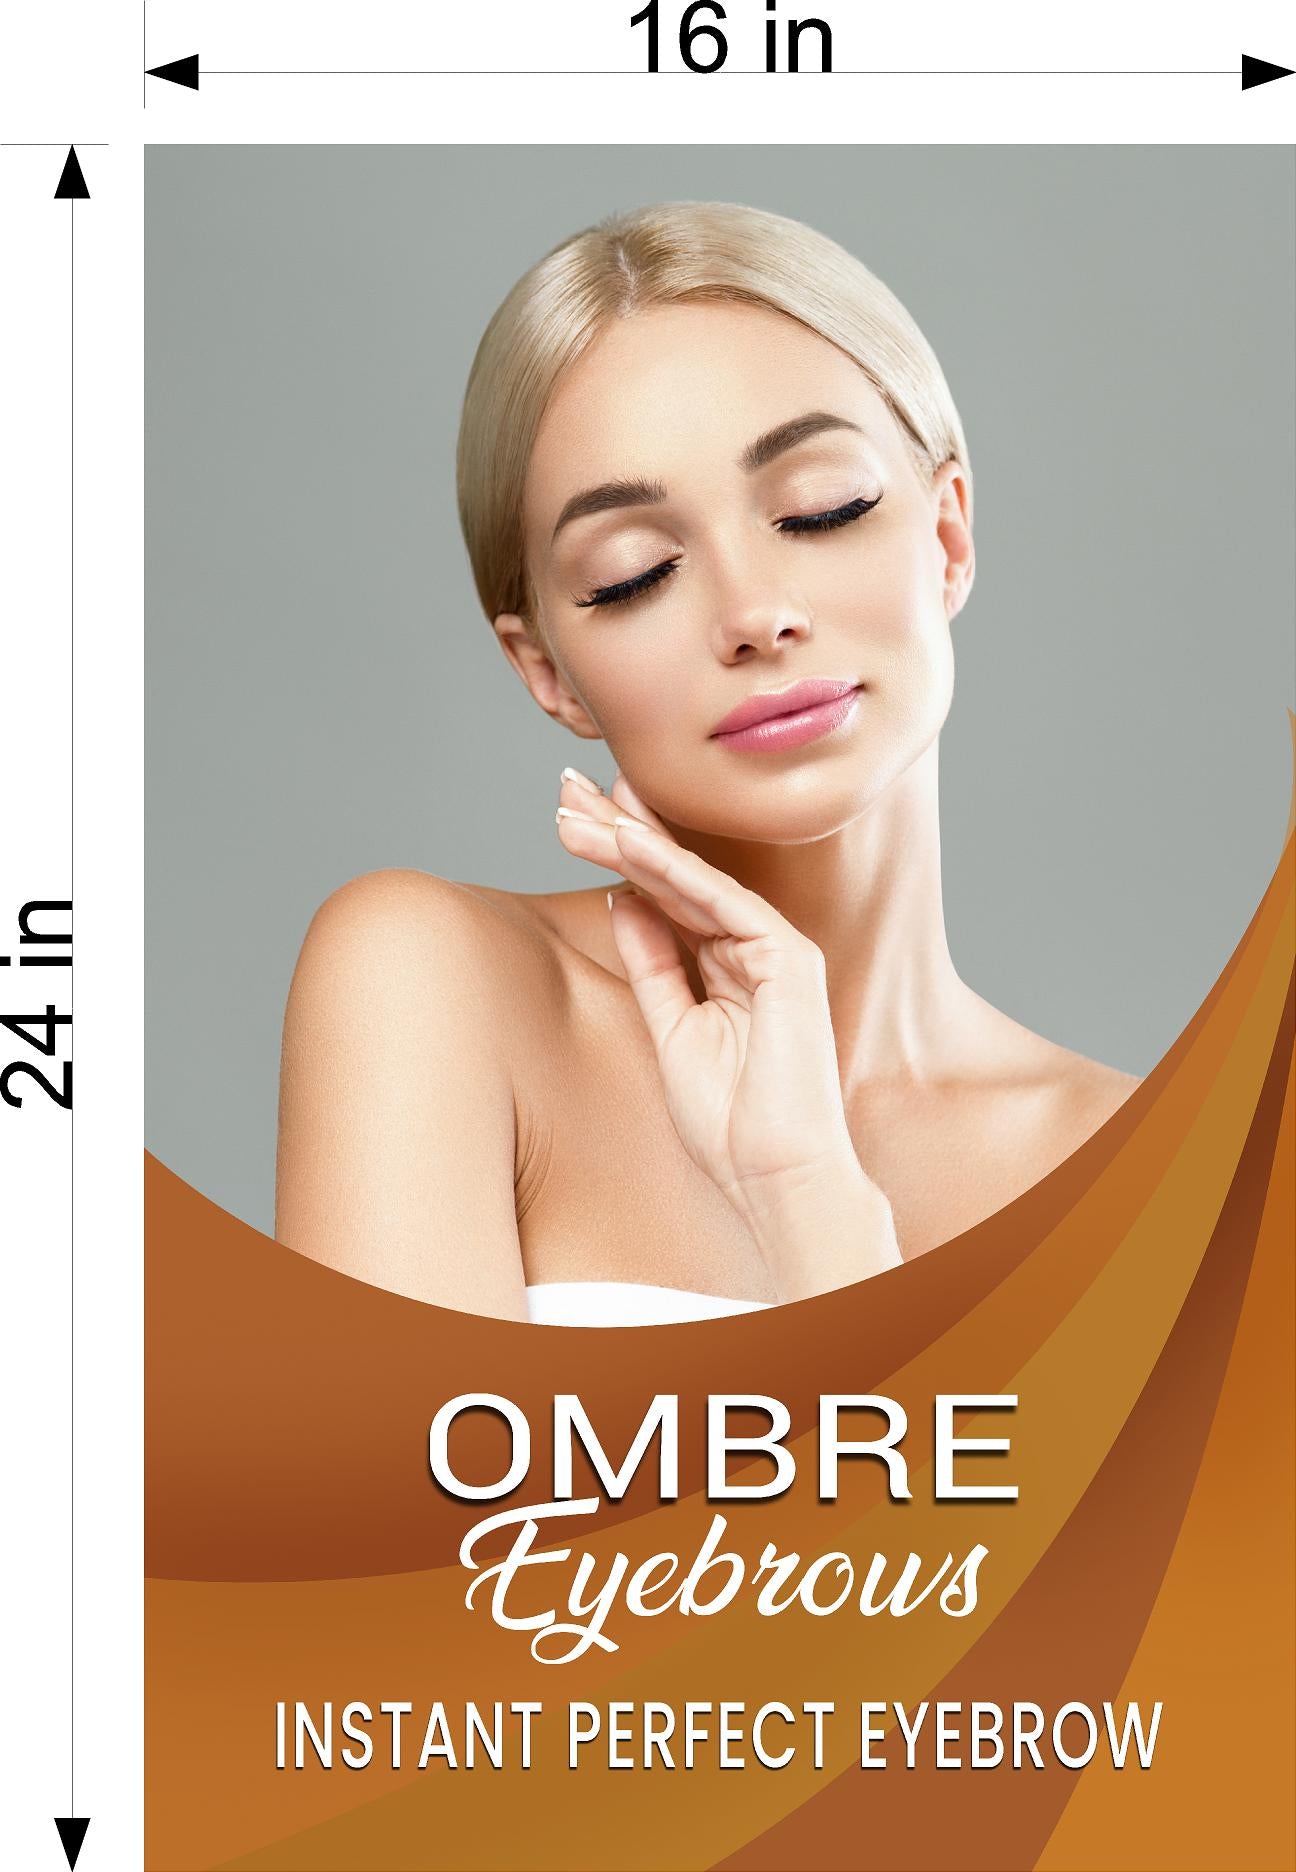 Ombre Eyebrows 01 Photo-Realistic Paper Poster Premium Salon Interior Inside Sign Advertising Marketing Wall Window Non-Laminated Vertical